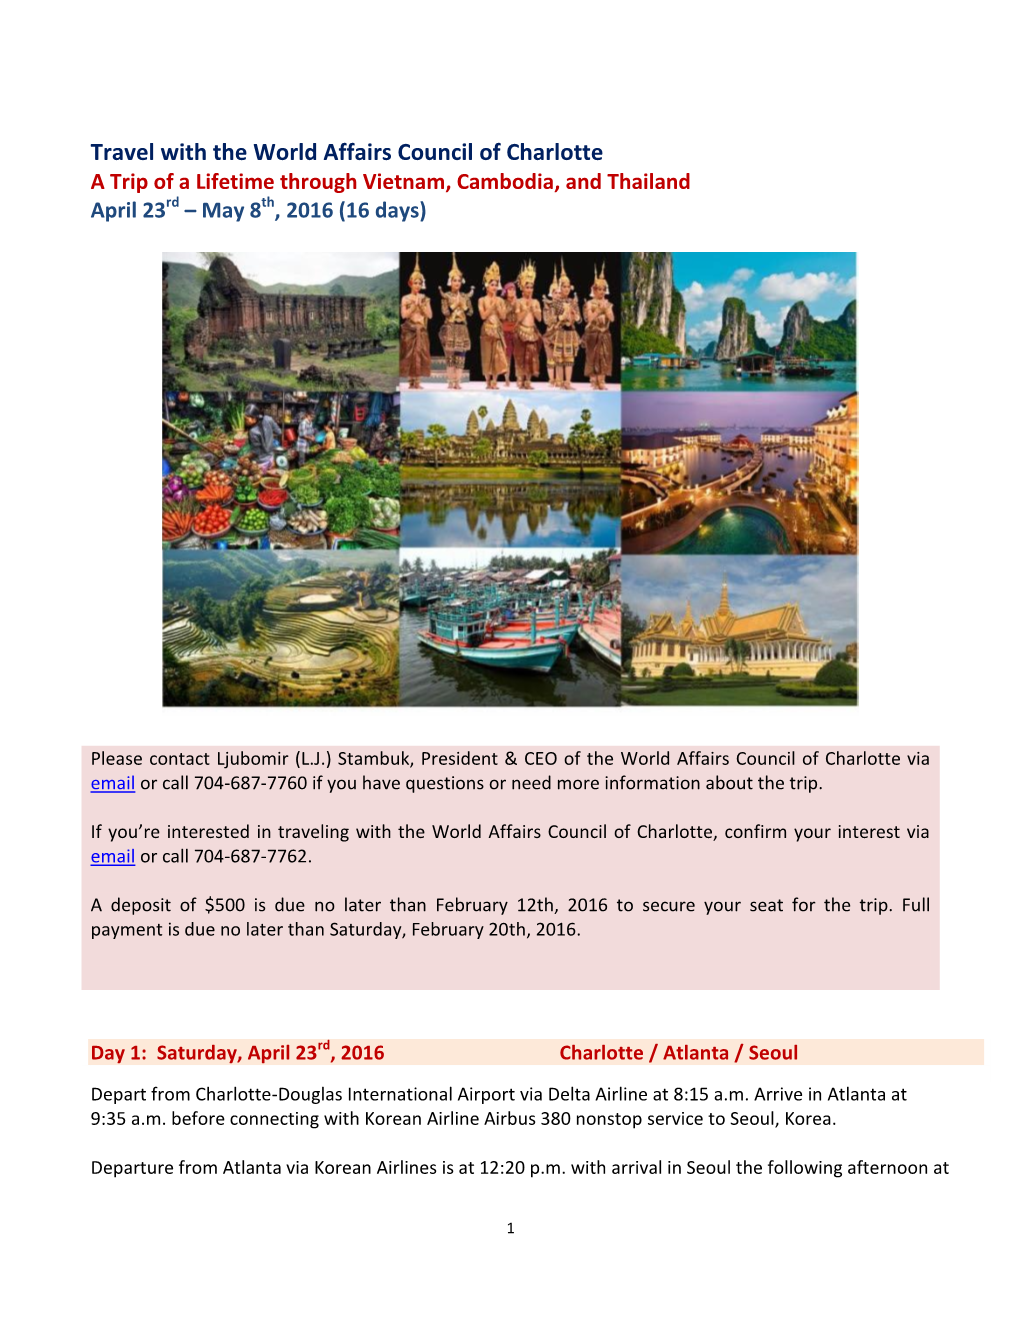 Travel with the World Affairs Council of Charlotte a Trip of a Lifetime Through Vietnam, Cambodia, and Thailand April 23Rd – May 8Th, 2016 (16 Days)